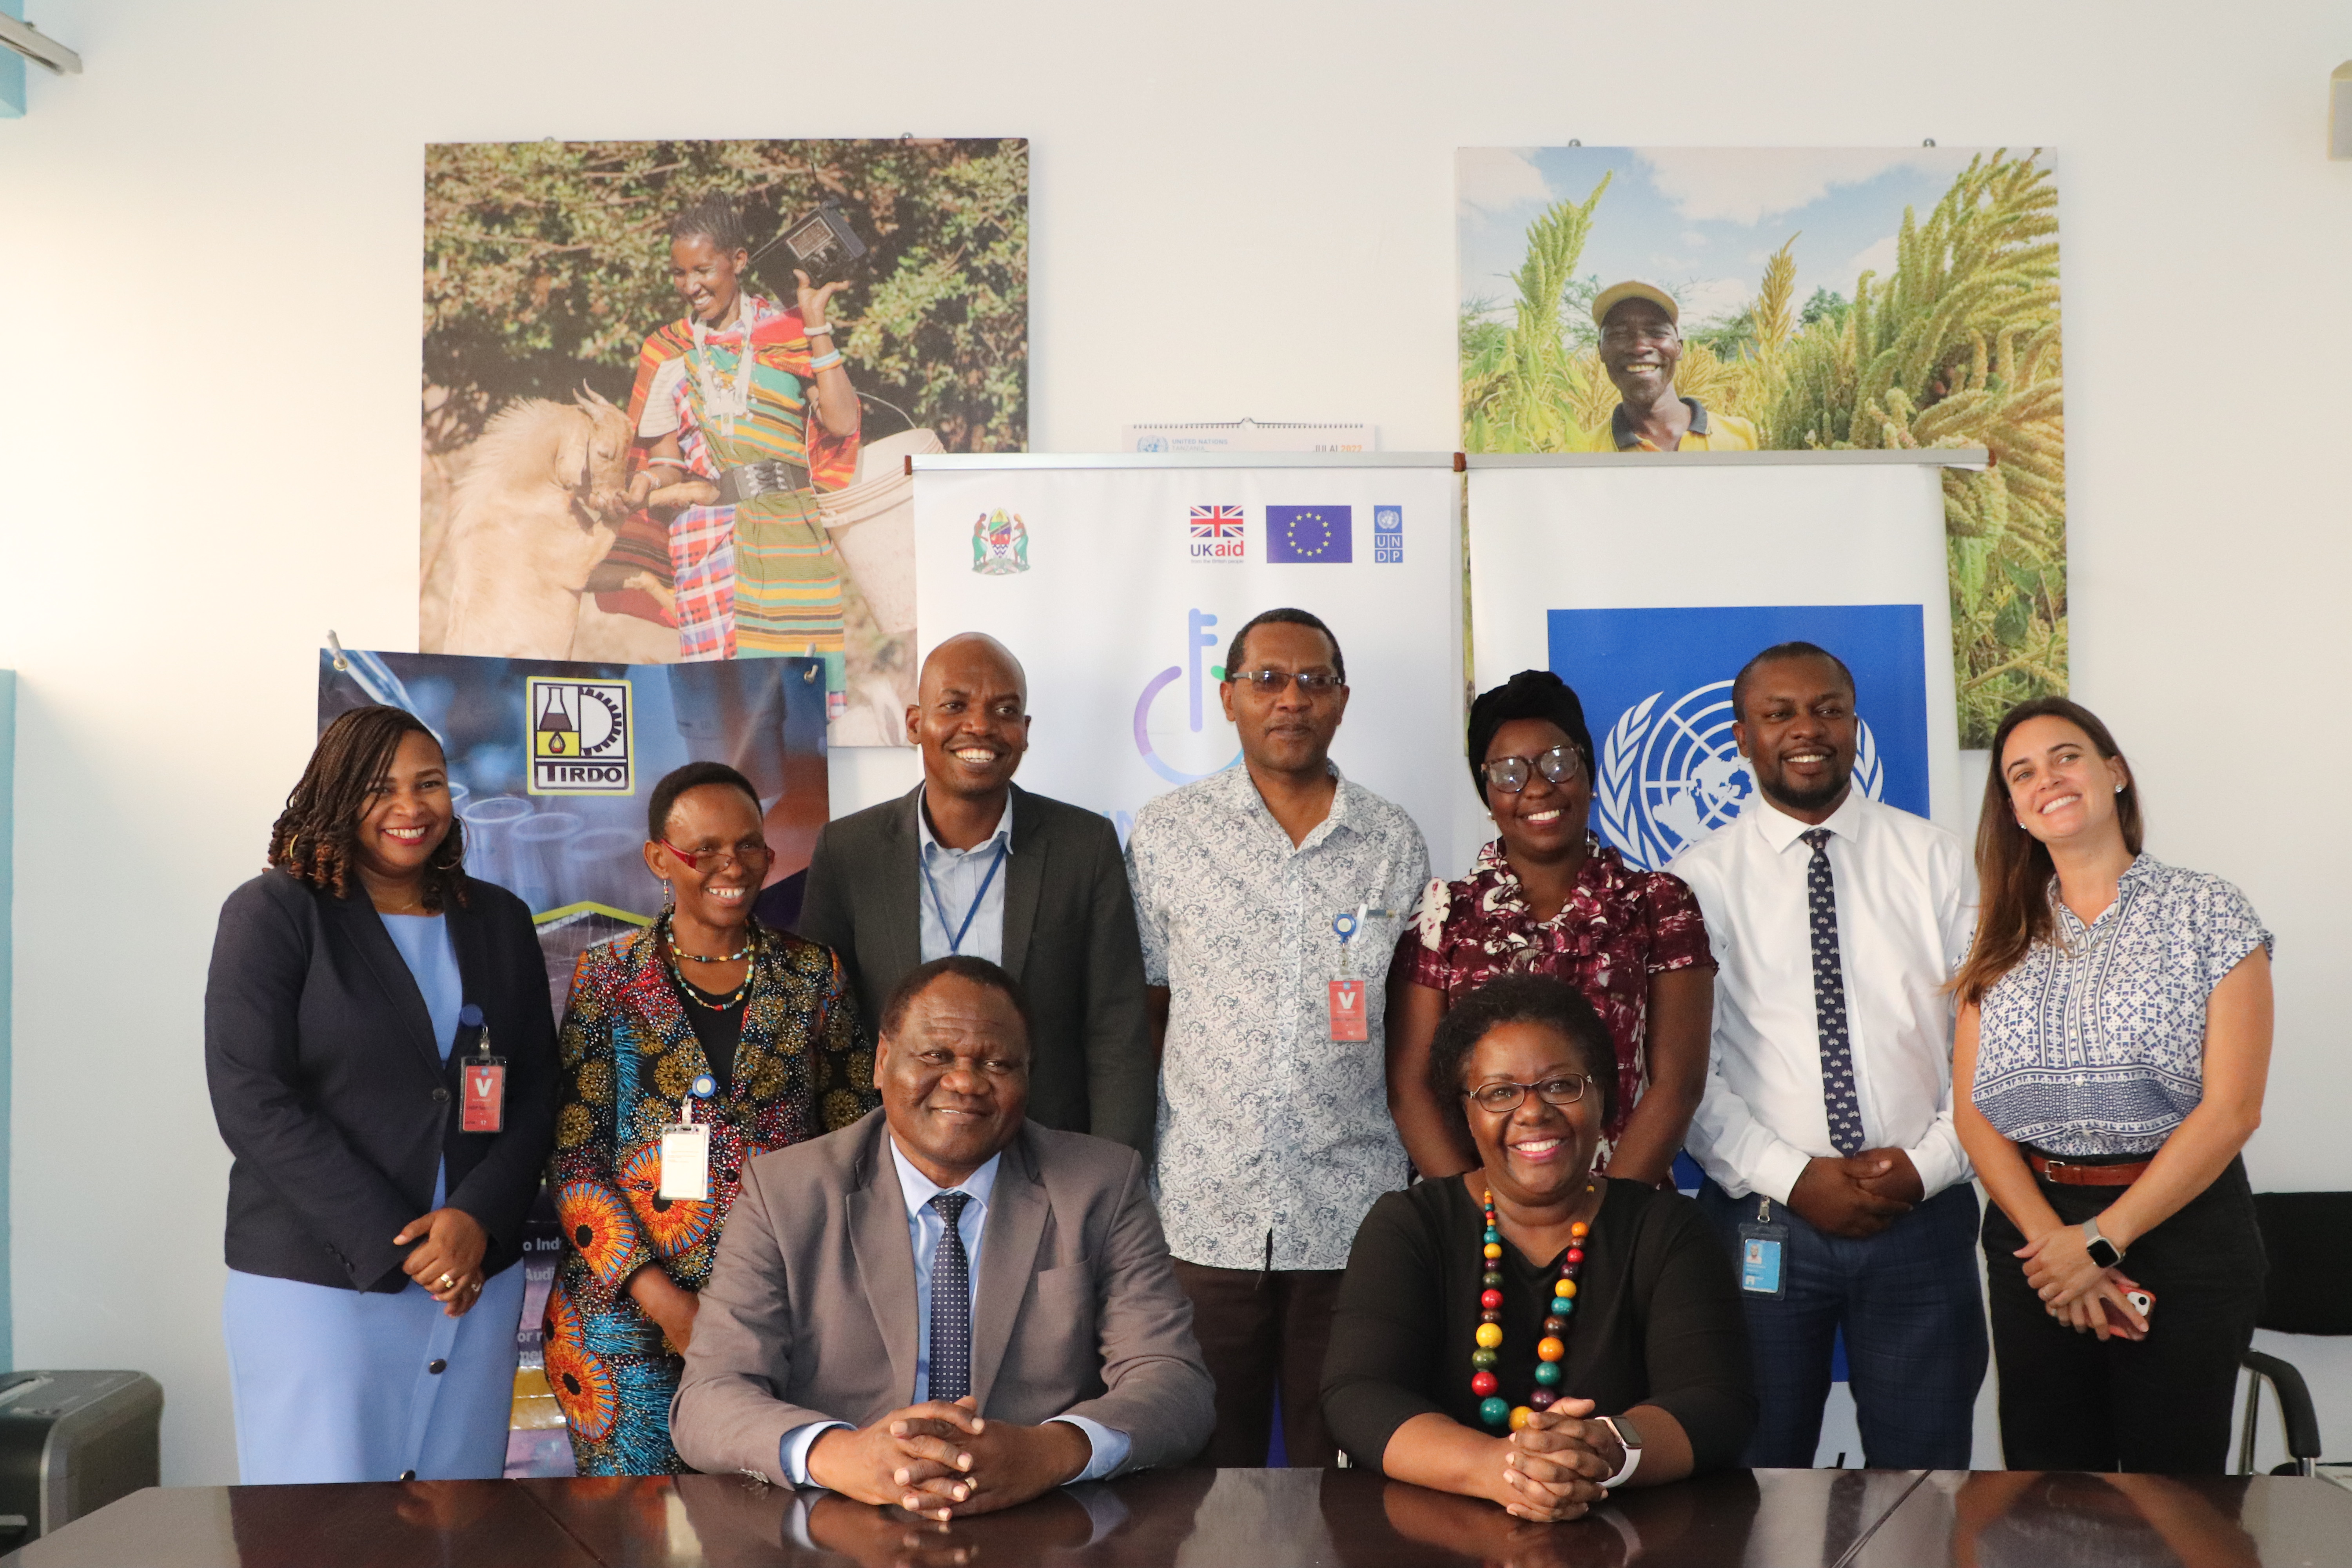 Director General (TIRDO) and the UNDP Residence representative in a picture during the signing of a letter of Agreement to support innovation management at TIRDO